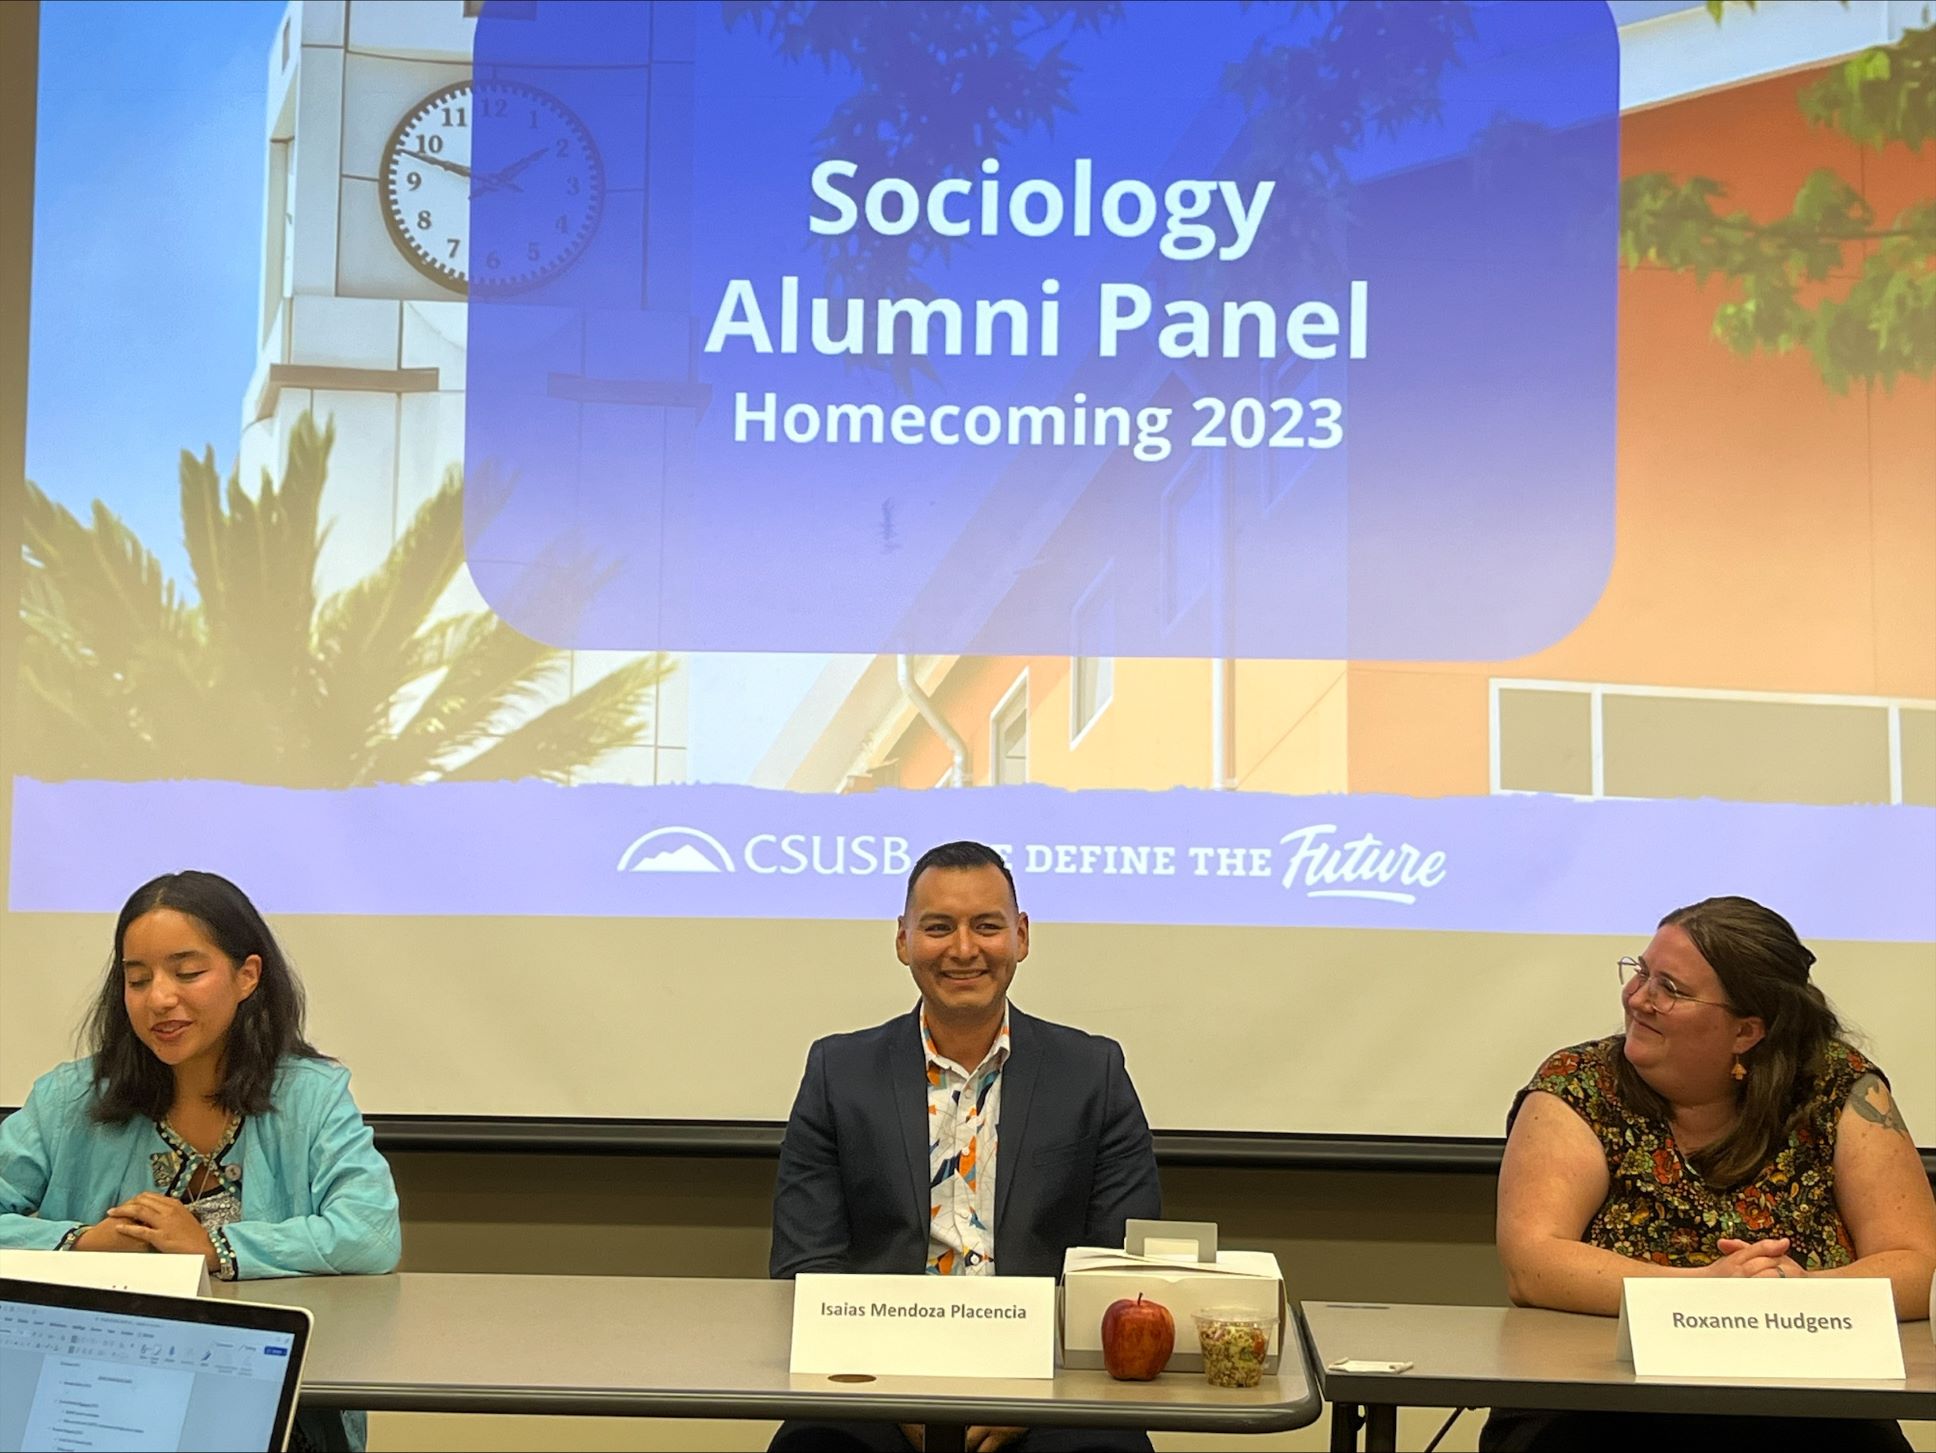 The image depicts three people sitting at a table facing an audience with the text "Sociology Alumni Panel Homecoming 2023" behind them.